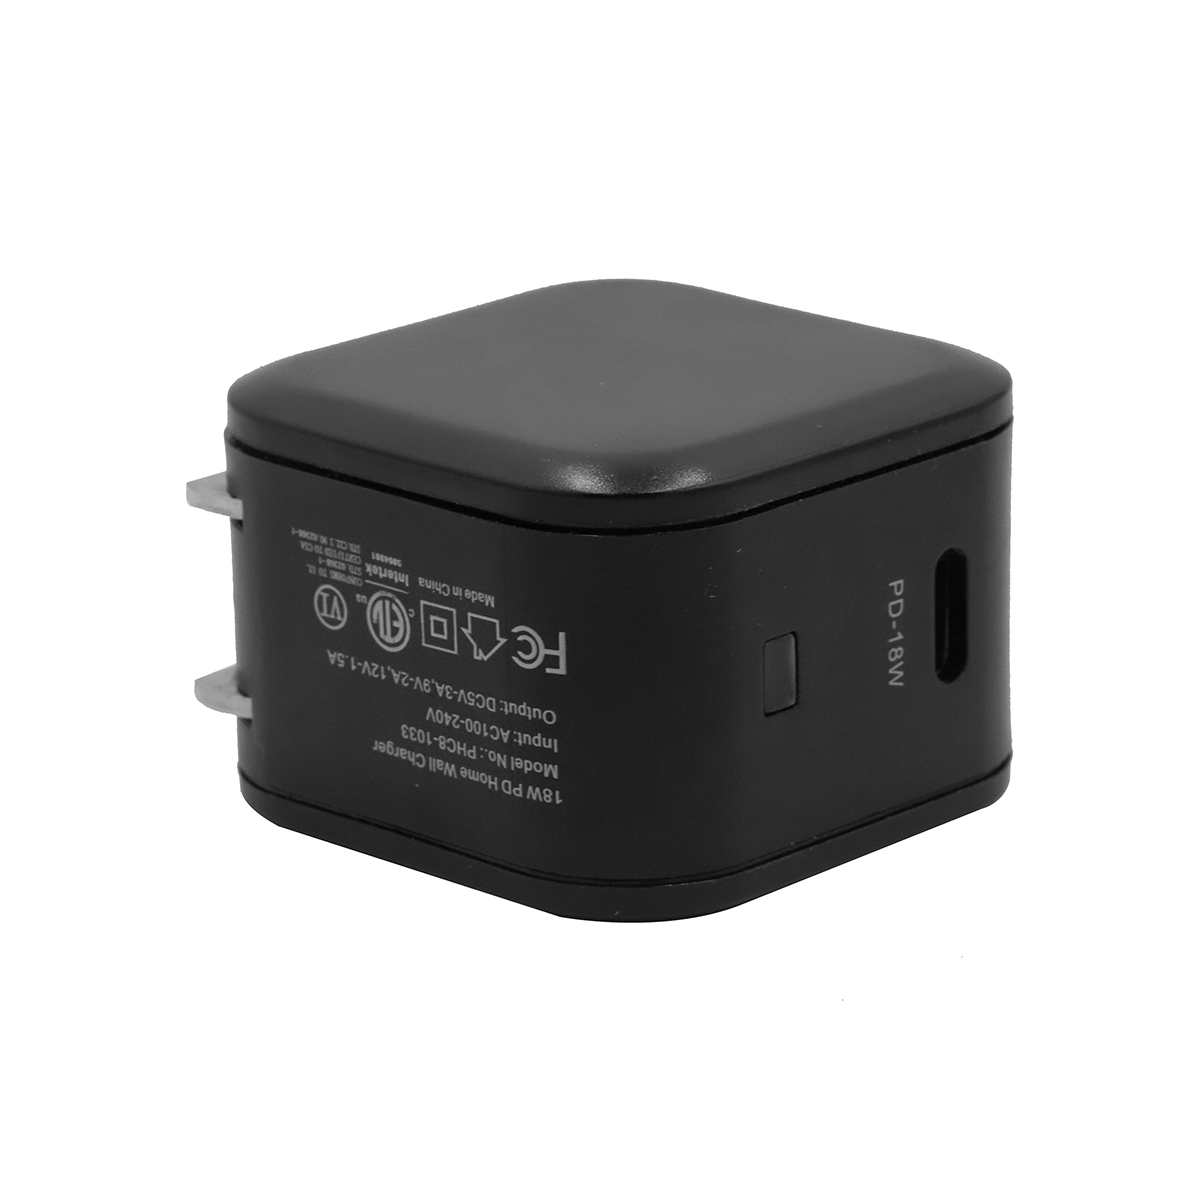 3. LM-1033 PD 18W Wall Charger with a Indicator Light Bulk Purchase and Corporate purchase from China Union Power -Description-